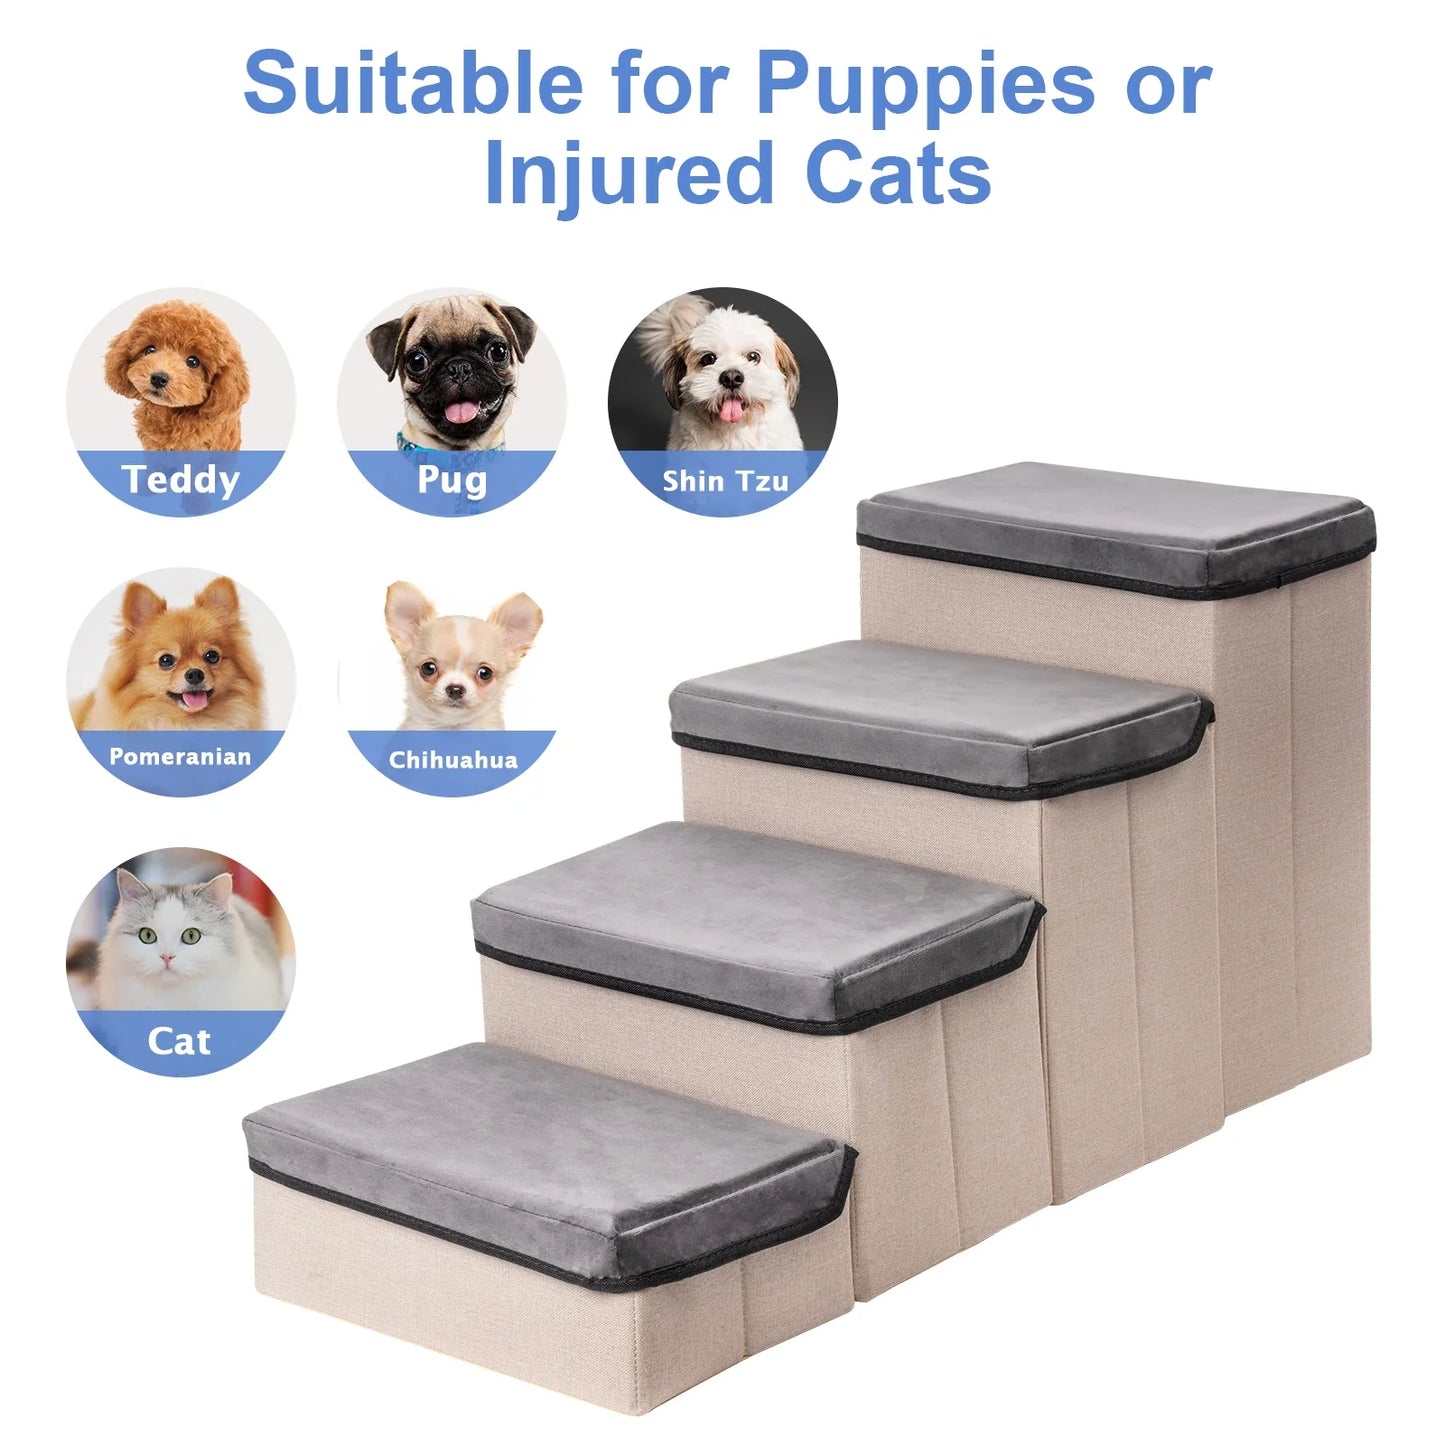 Pat and Pet Emporium | Pet Home Products | Foldable Dog Stairs 4 Tier